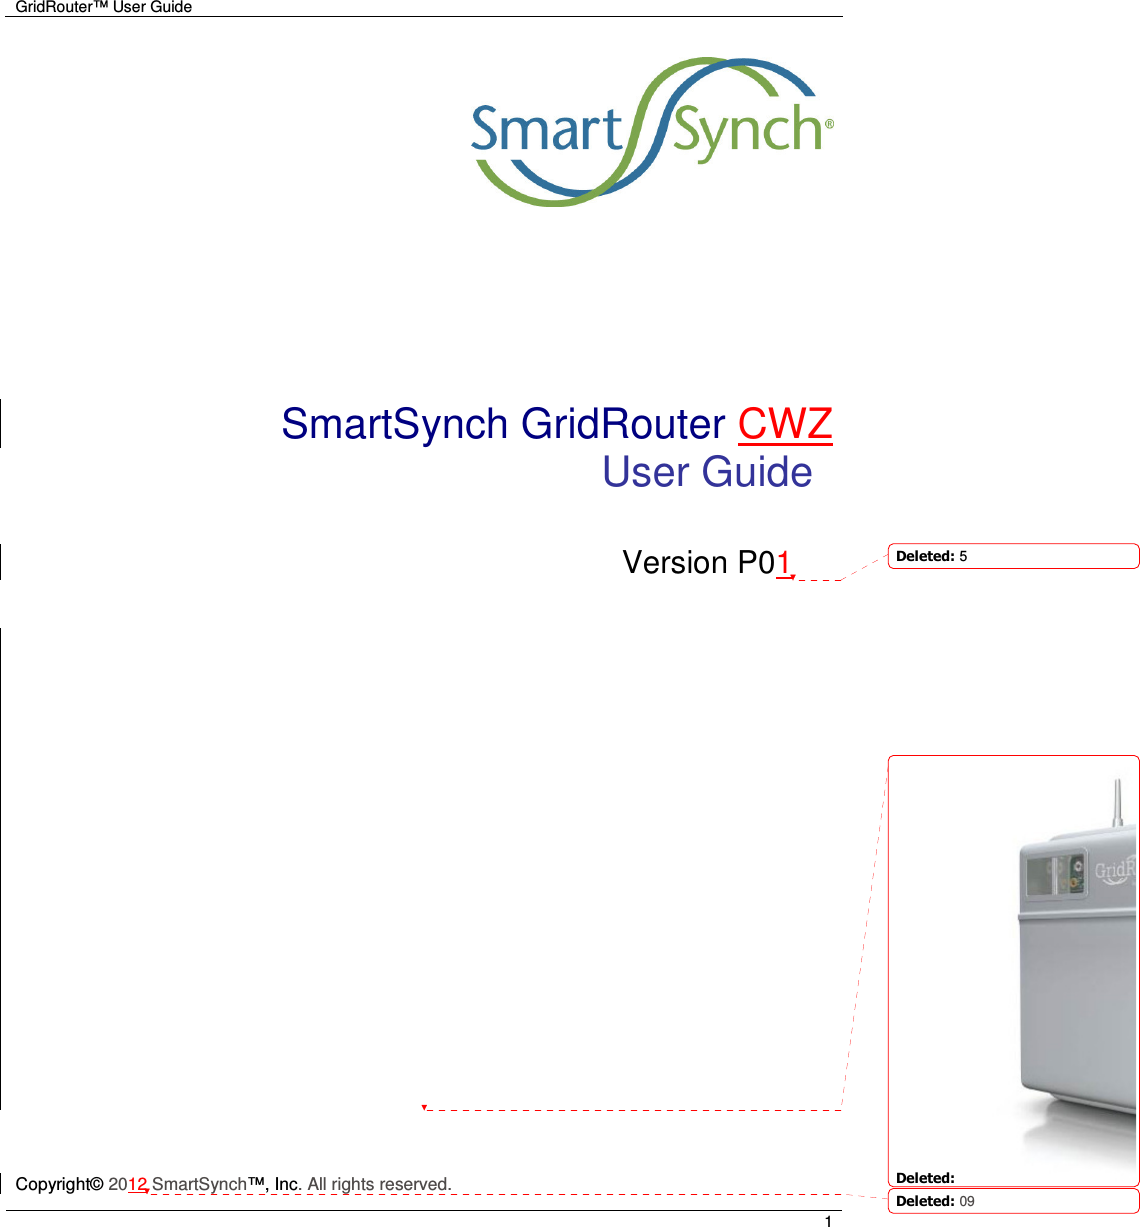 GridRouter™ User Guide        1       SmartSynch GridRouter CWZ User Guide  Version P01               Copyright© 2012 SmartSynch™, Inc. All rights reserved. Deleted: 5Deleted: Deleted: 09